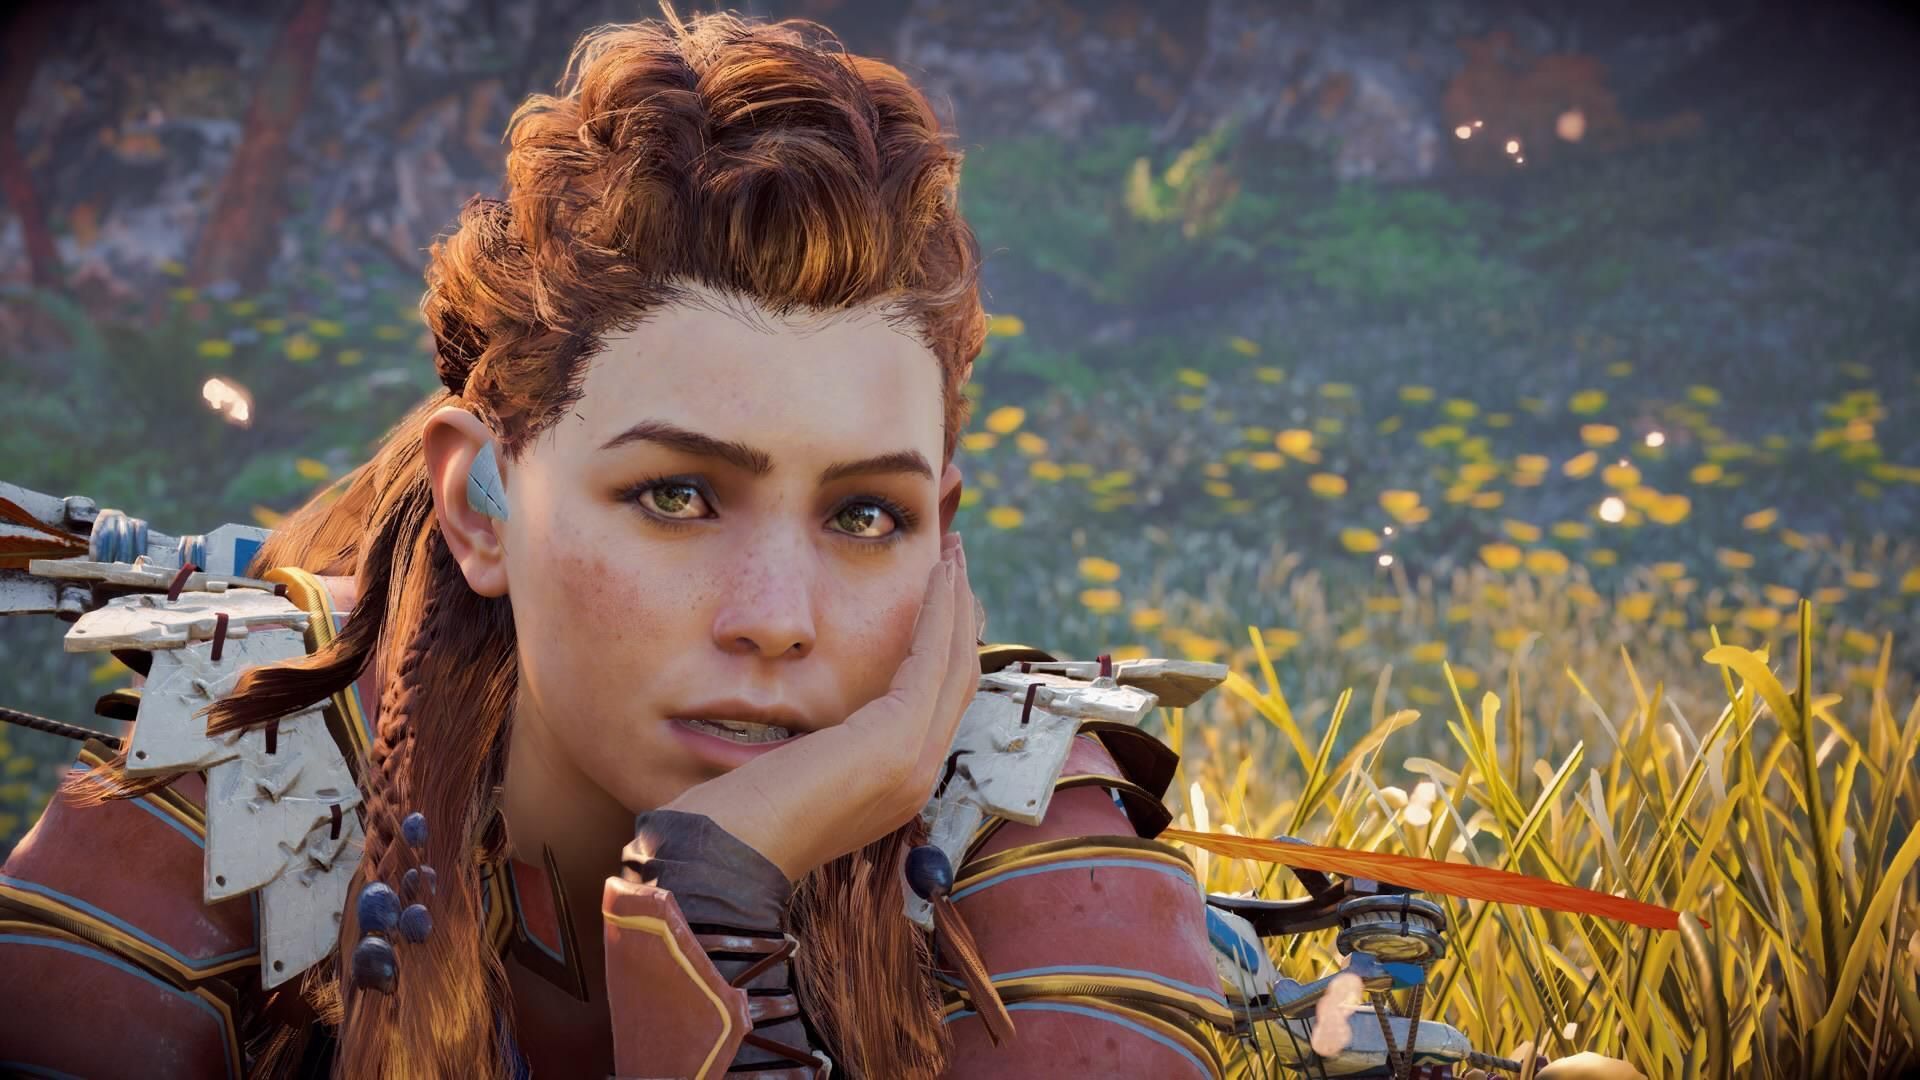 Horizon Zero Dawn Series: All You Need To Know About The Adaptation